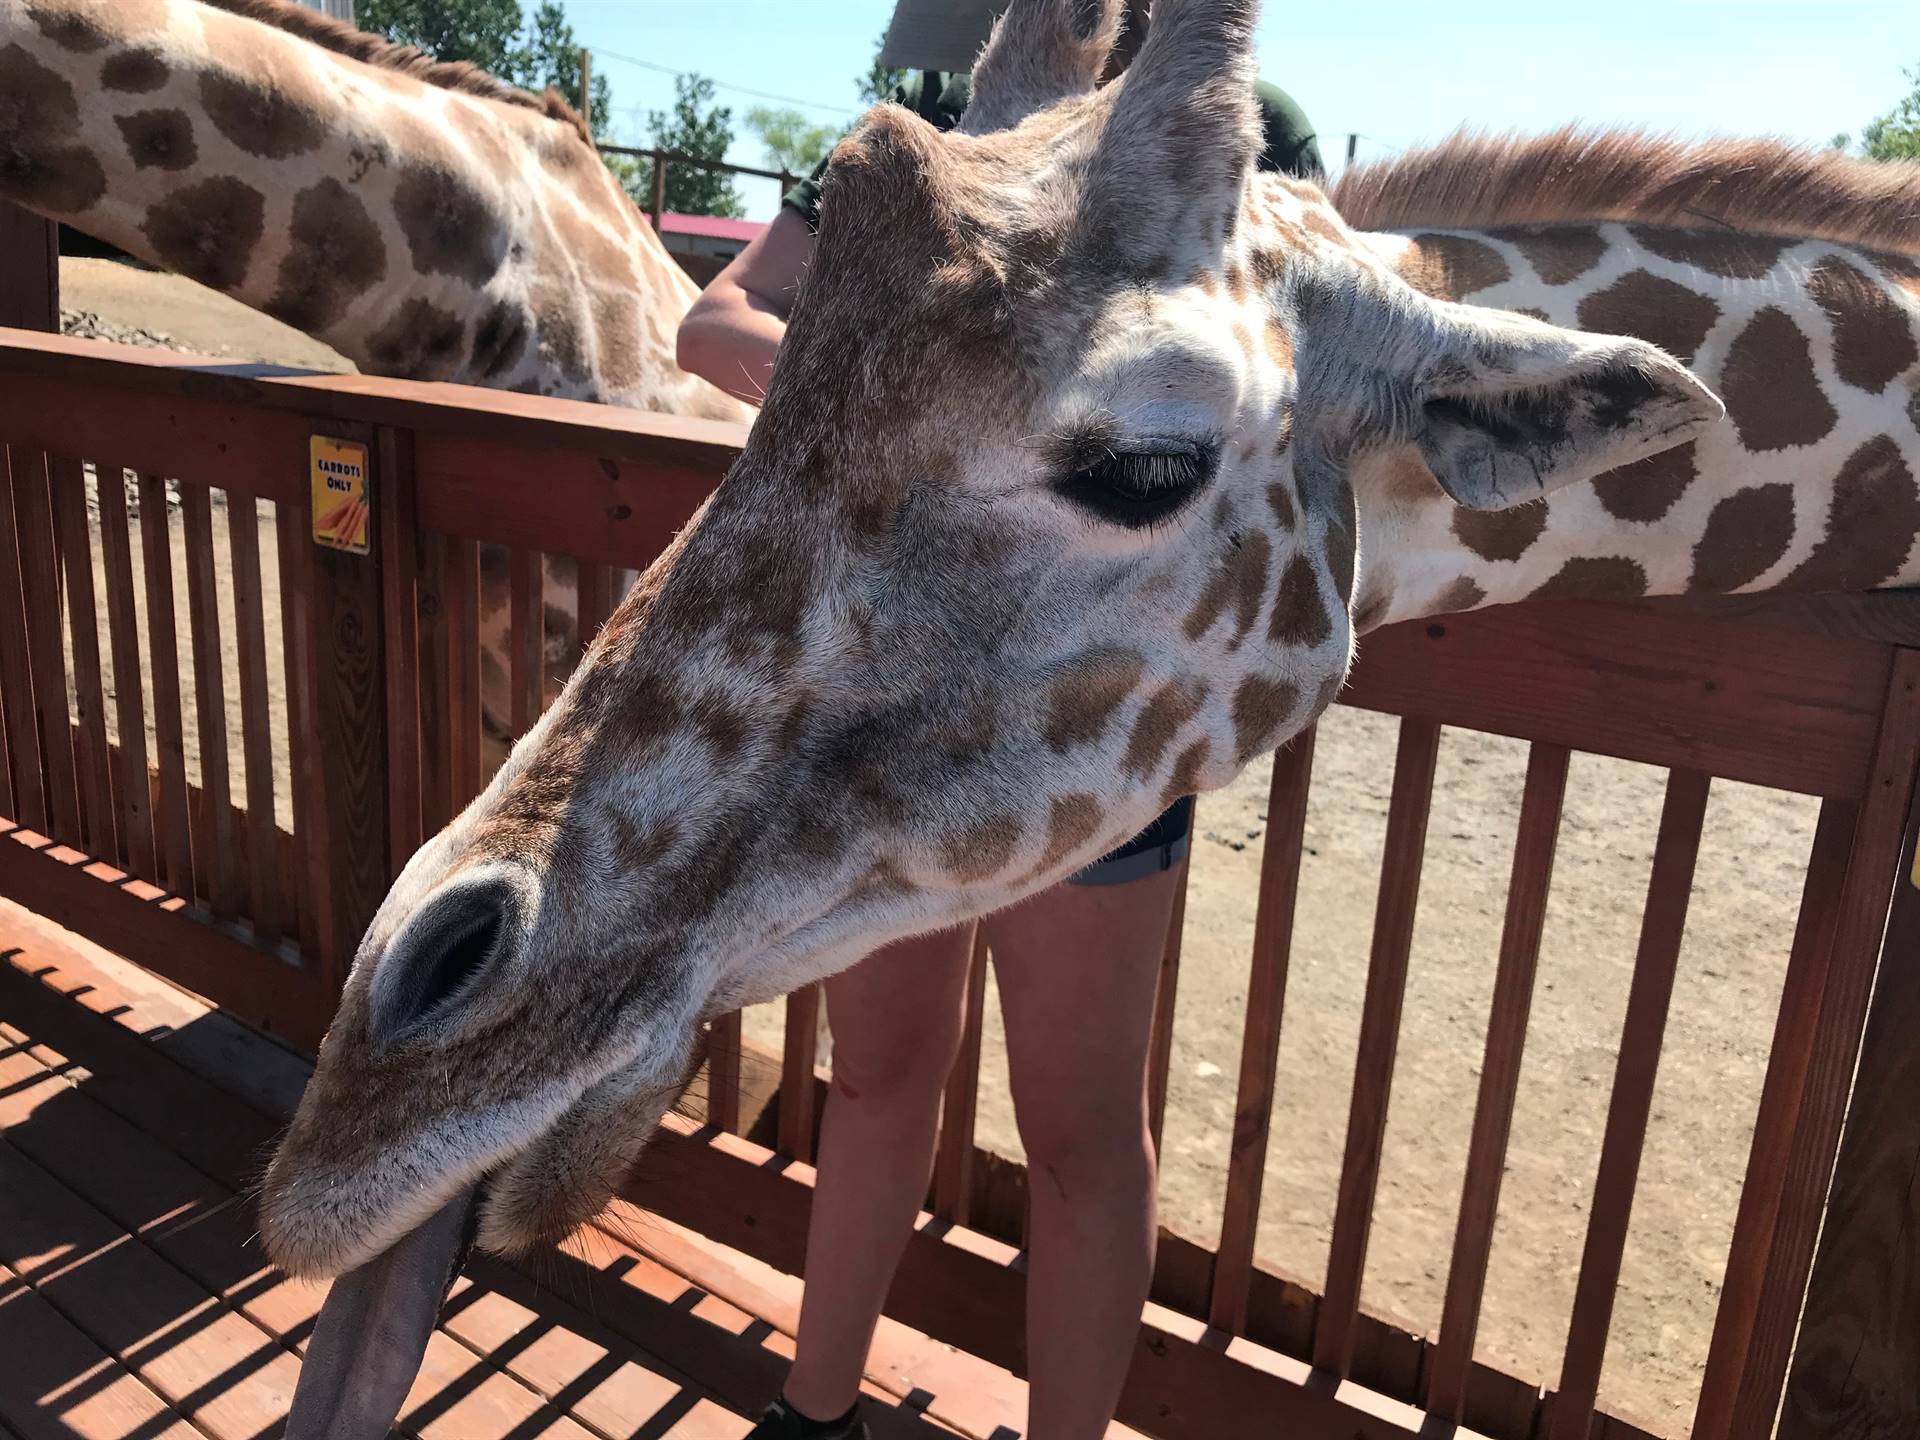 The giraffe hangs out her tongue in anticipation of a carrot!